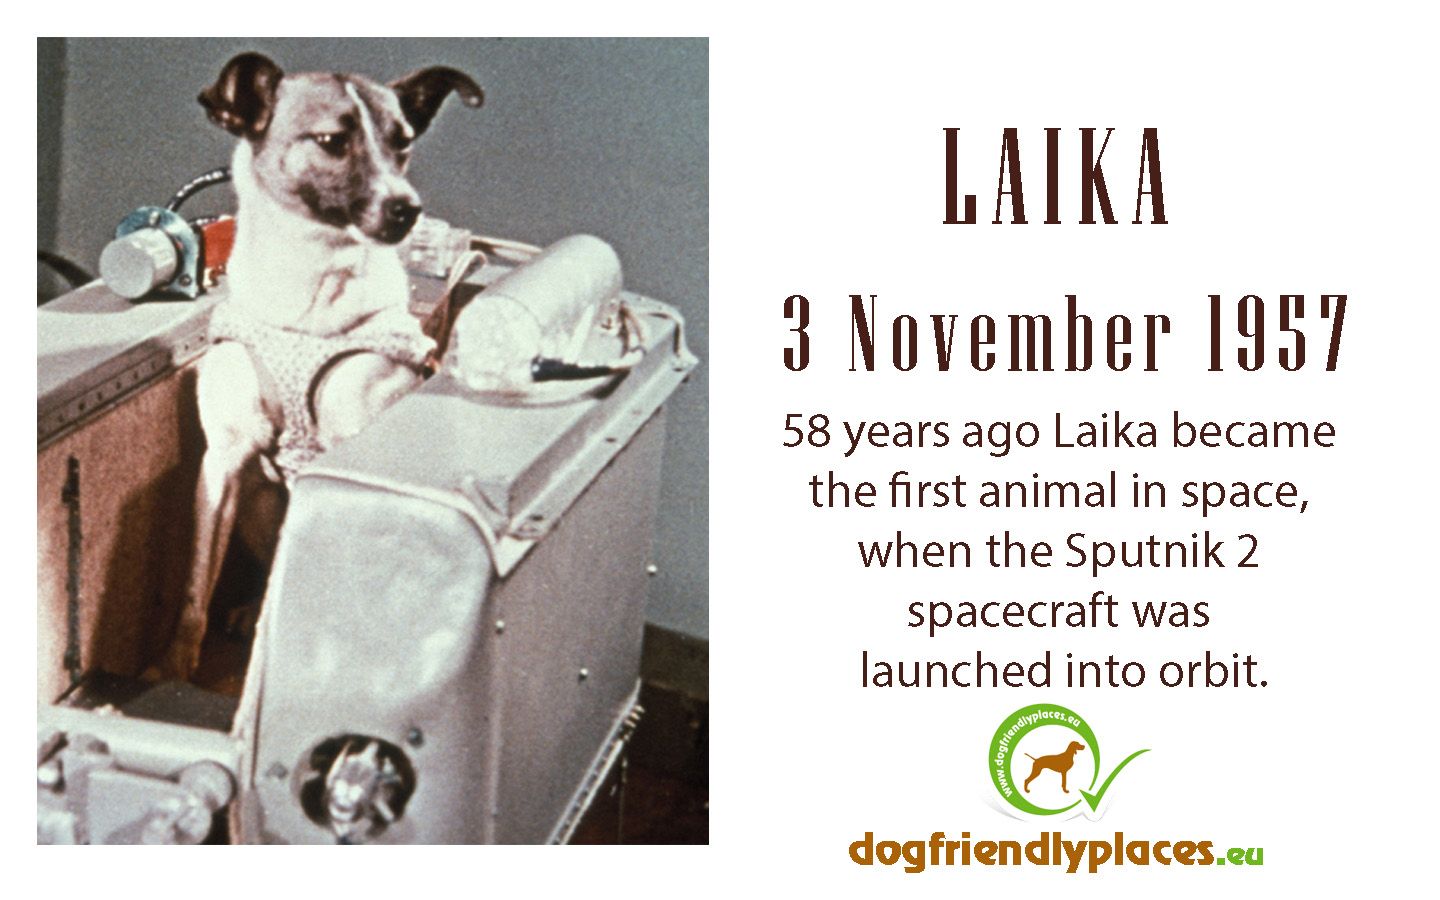 what happened to the russian dog laika that was the first animal in space